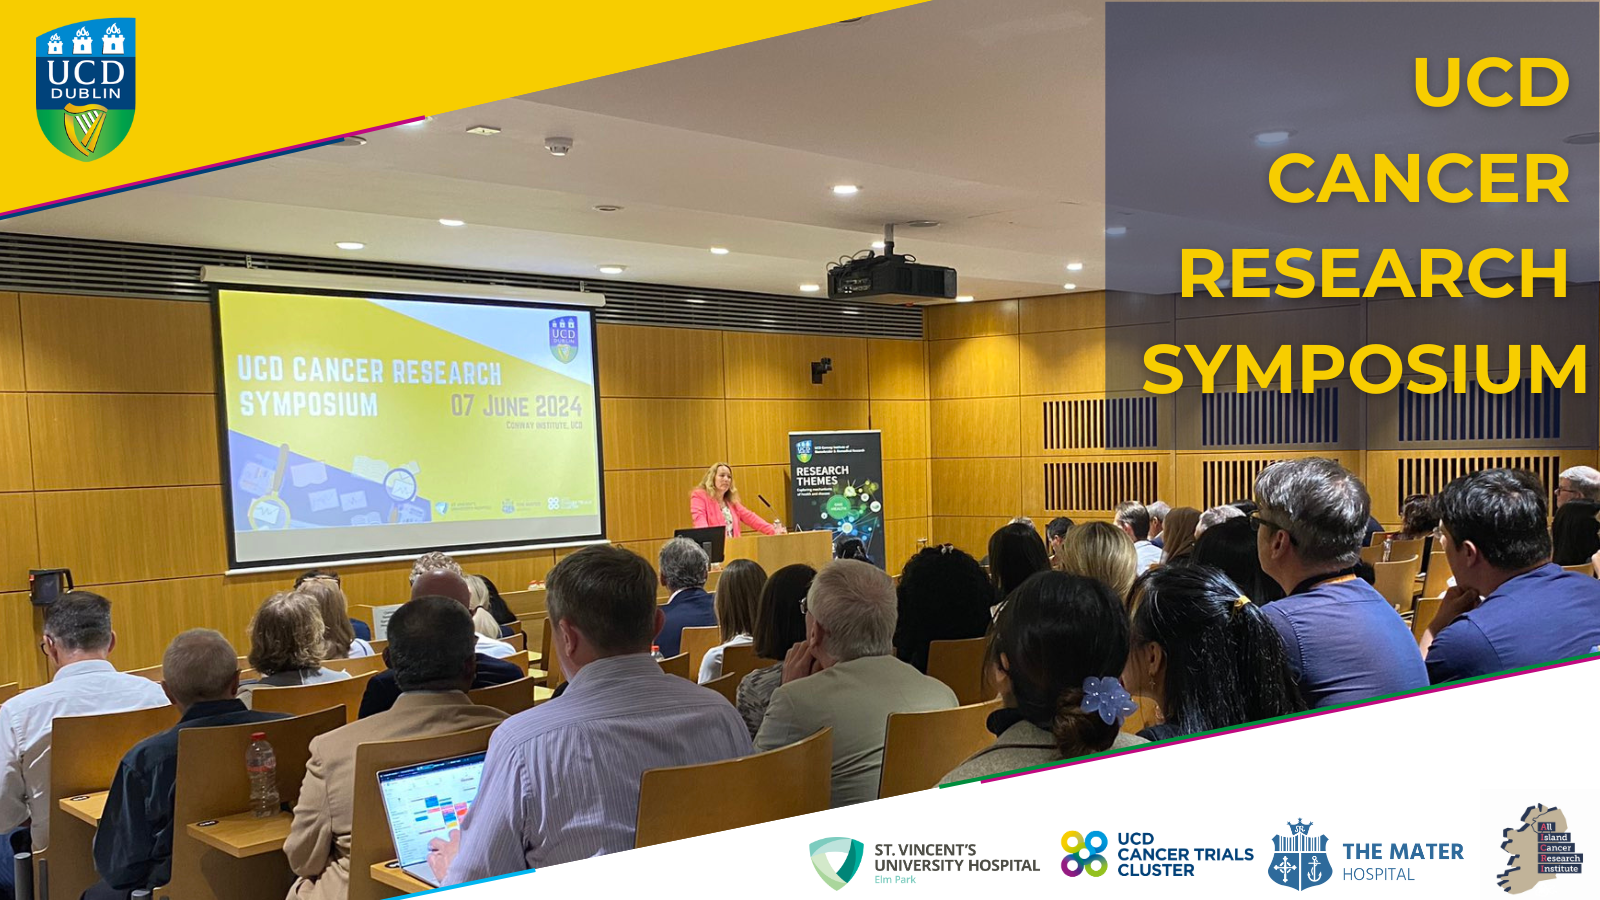 Image of people attending the UCD Cancer Research Symposium at the UCD Conway on 7th June 2024. The logos of UCD, the UCD Cancer Trials Cluster, St Vinctent's and the Mater Hospital are present. The text 'UCD Cancer Trials Cluster' is overlayed on the image.